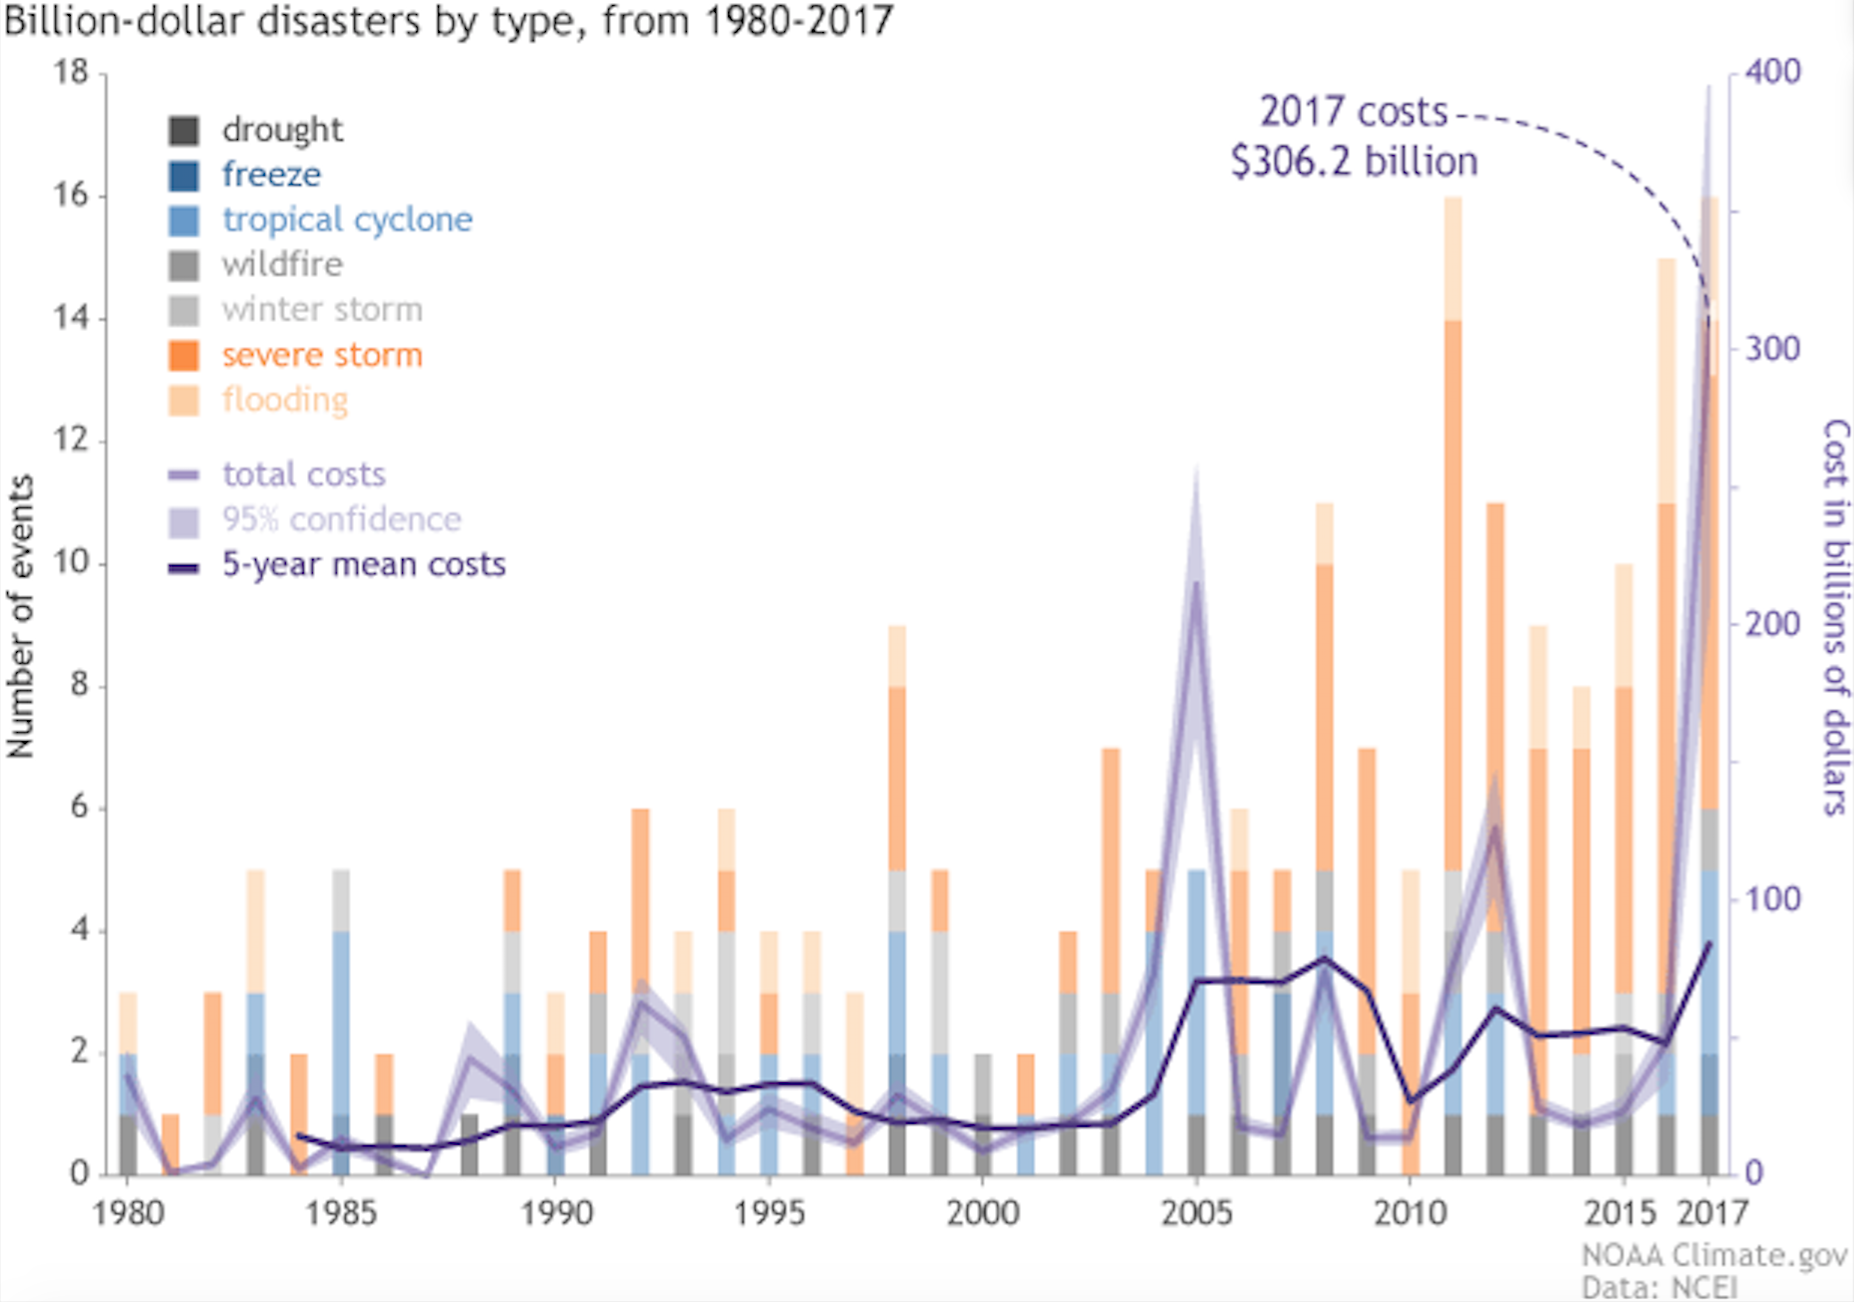 Graph of disaster costs over several decades